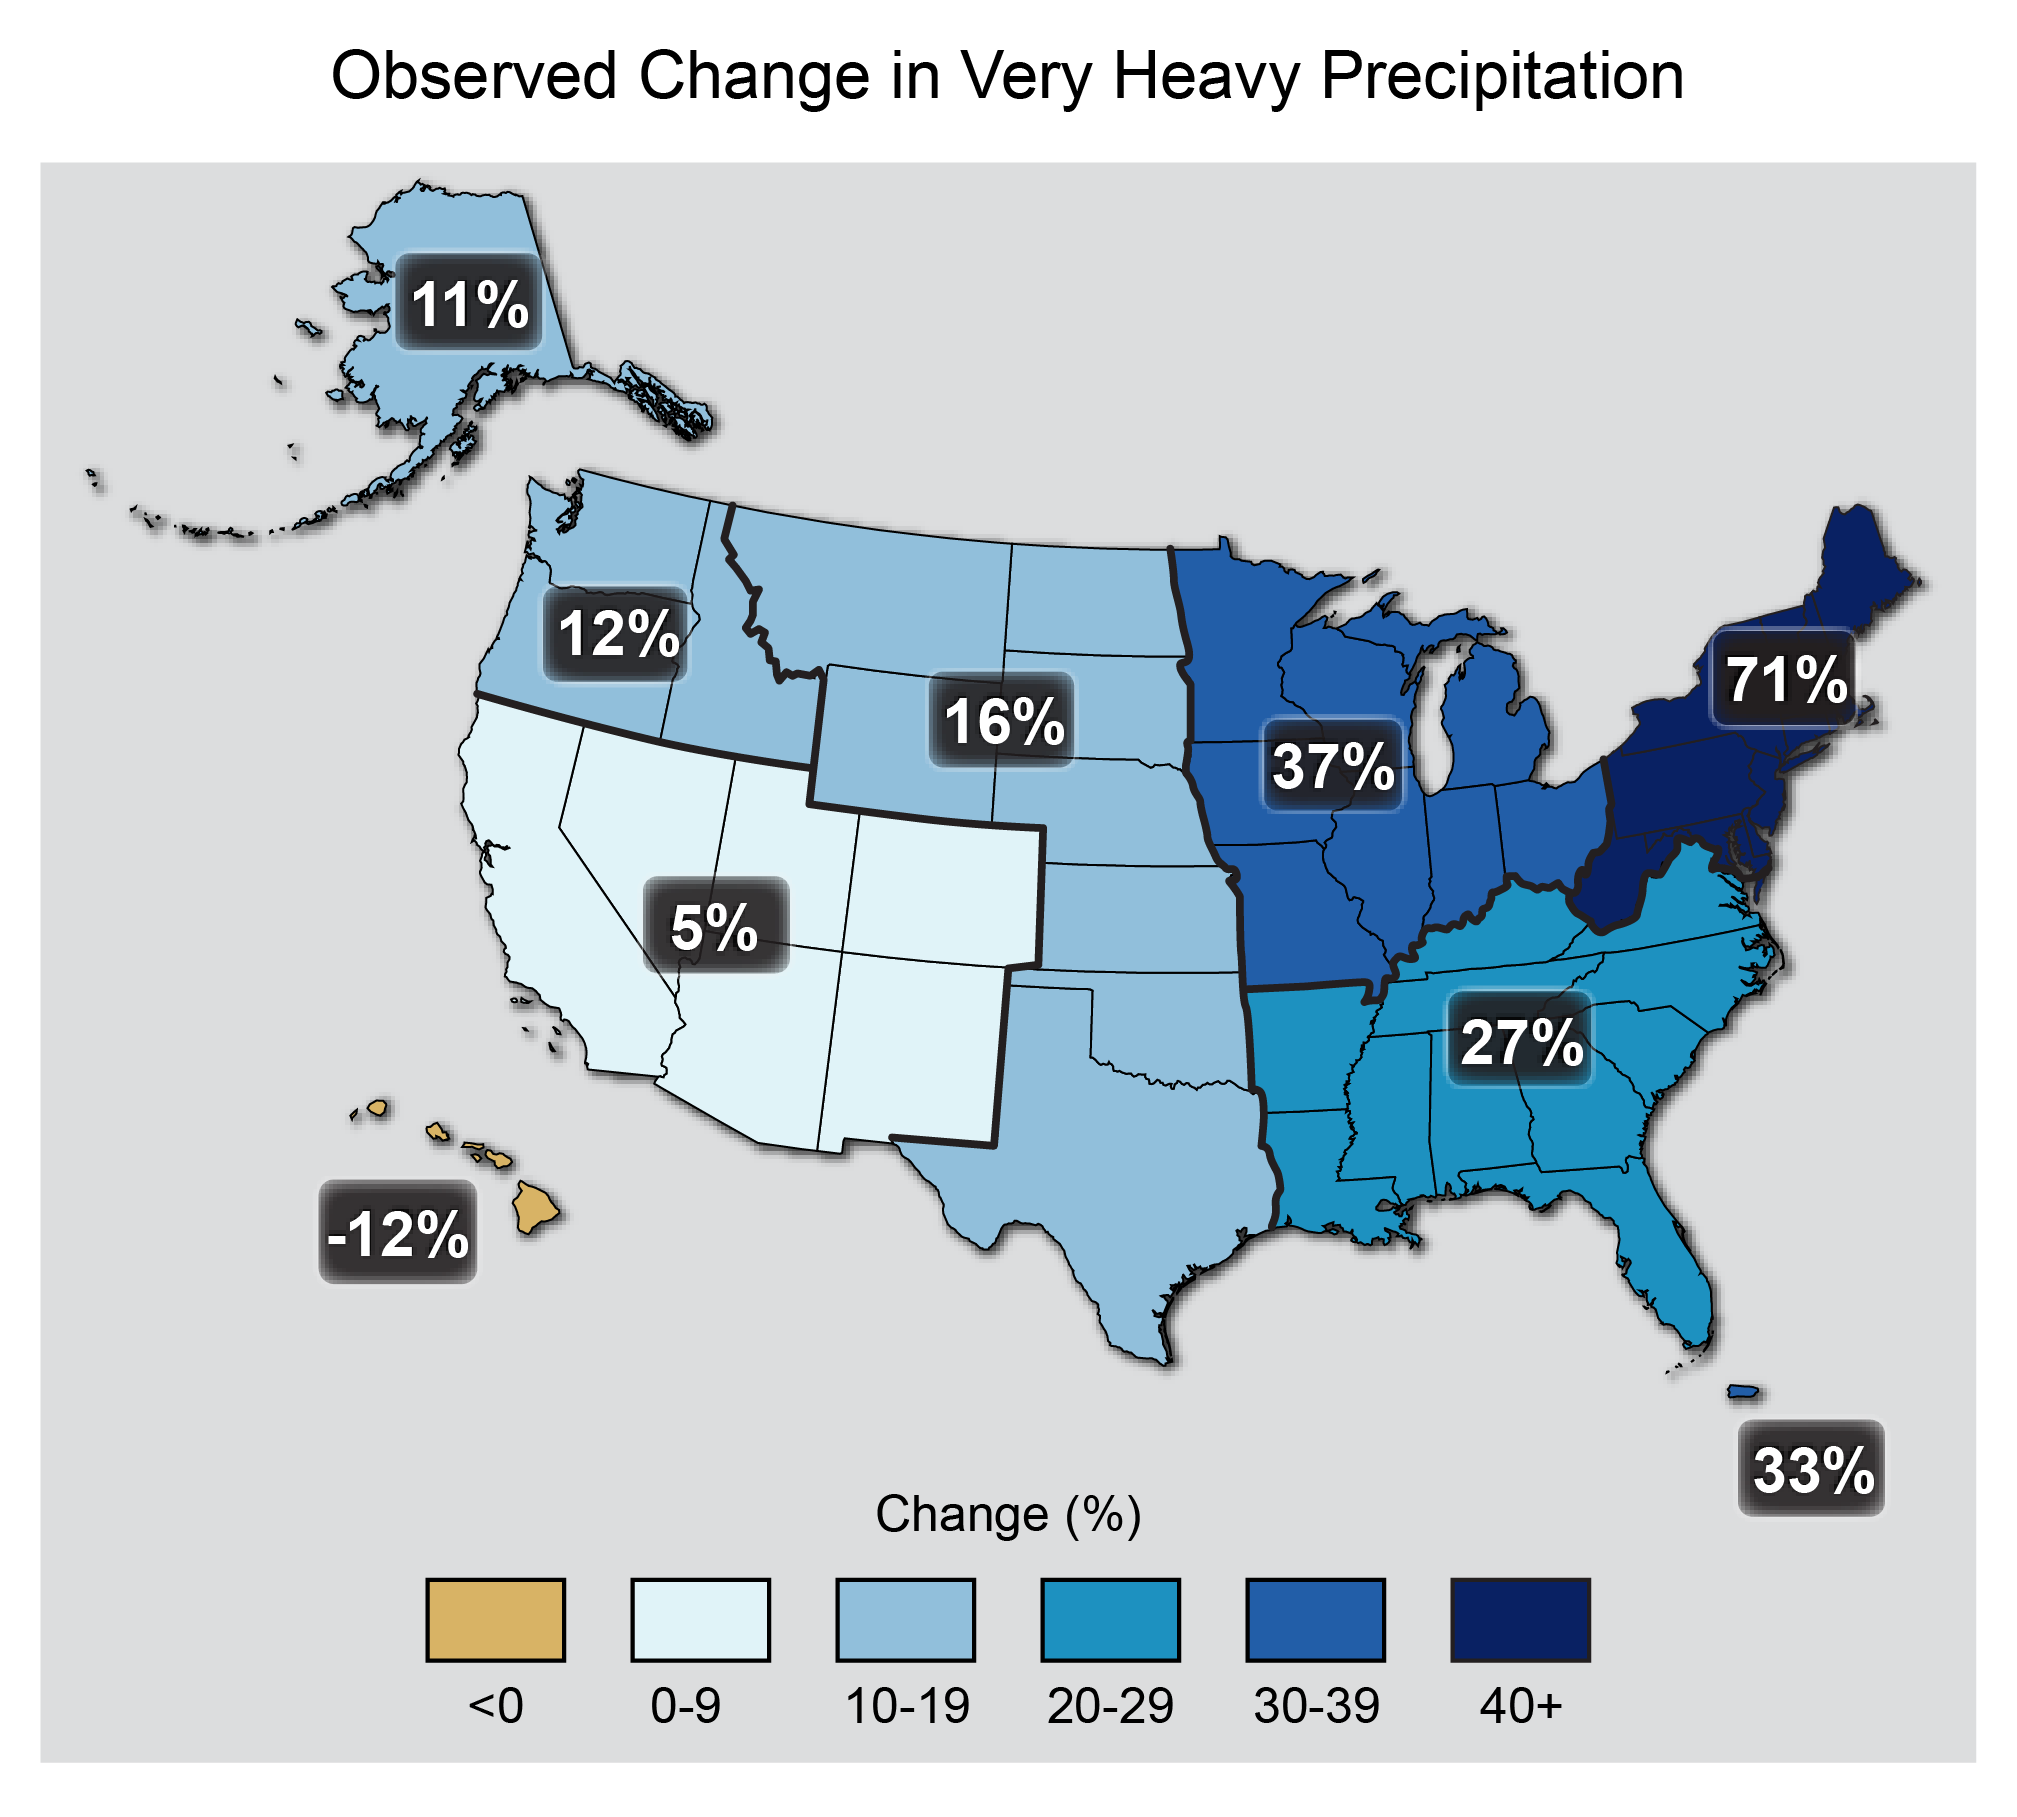 Map of the U.S. showing regions where heavy precipitation has increased since the mid-20th century